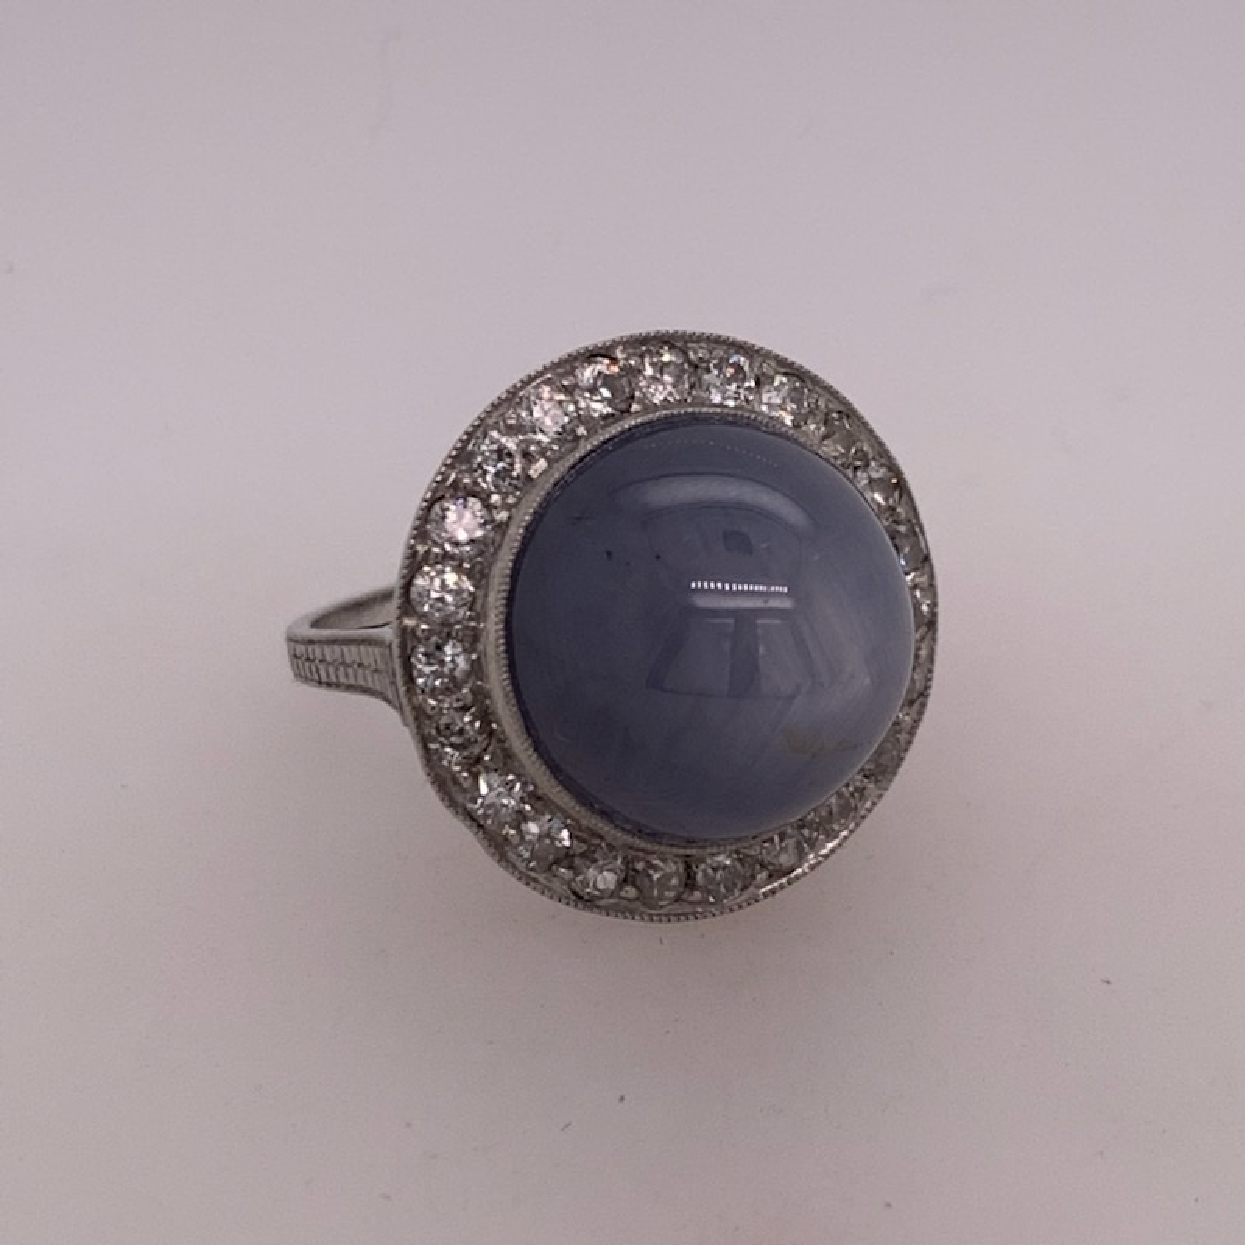 18k White Gold Un-Heated Grey-Blue Burma Star Sapphire with Old Mine Cut Diamond Halo Size 7

Comes with copy of AGL Certificate